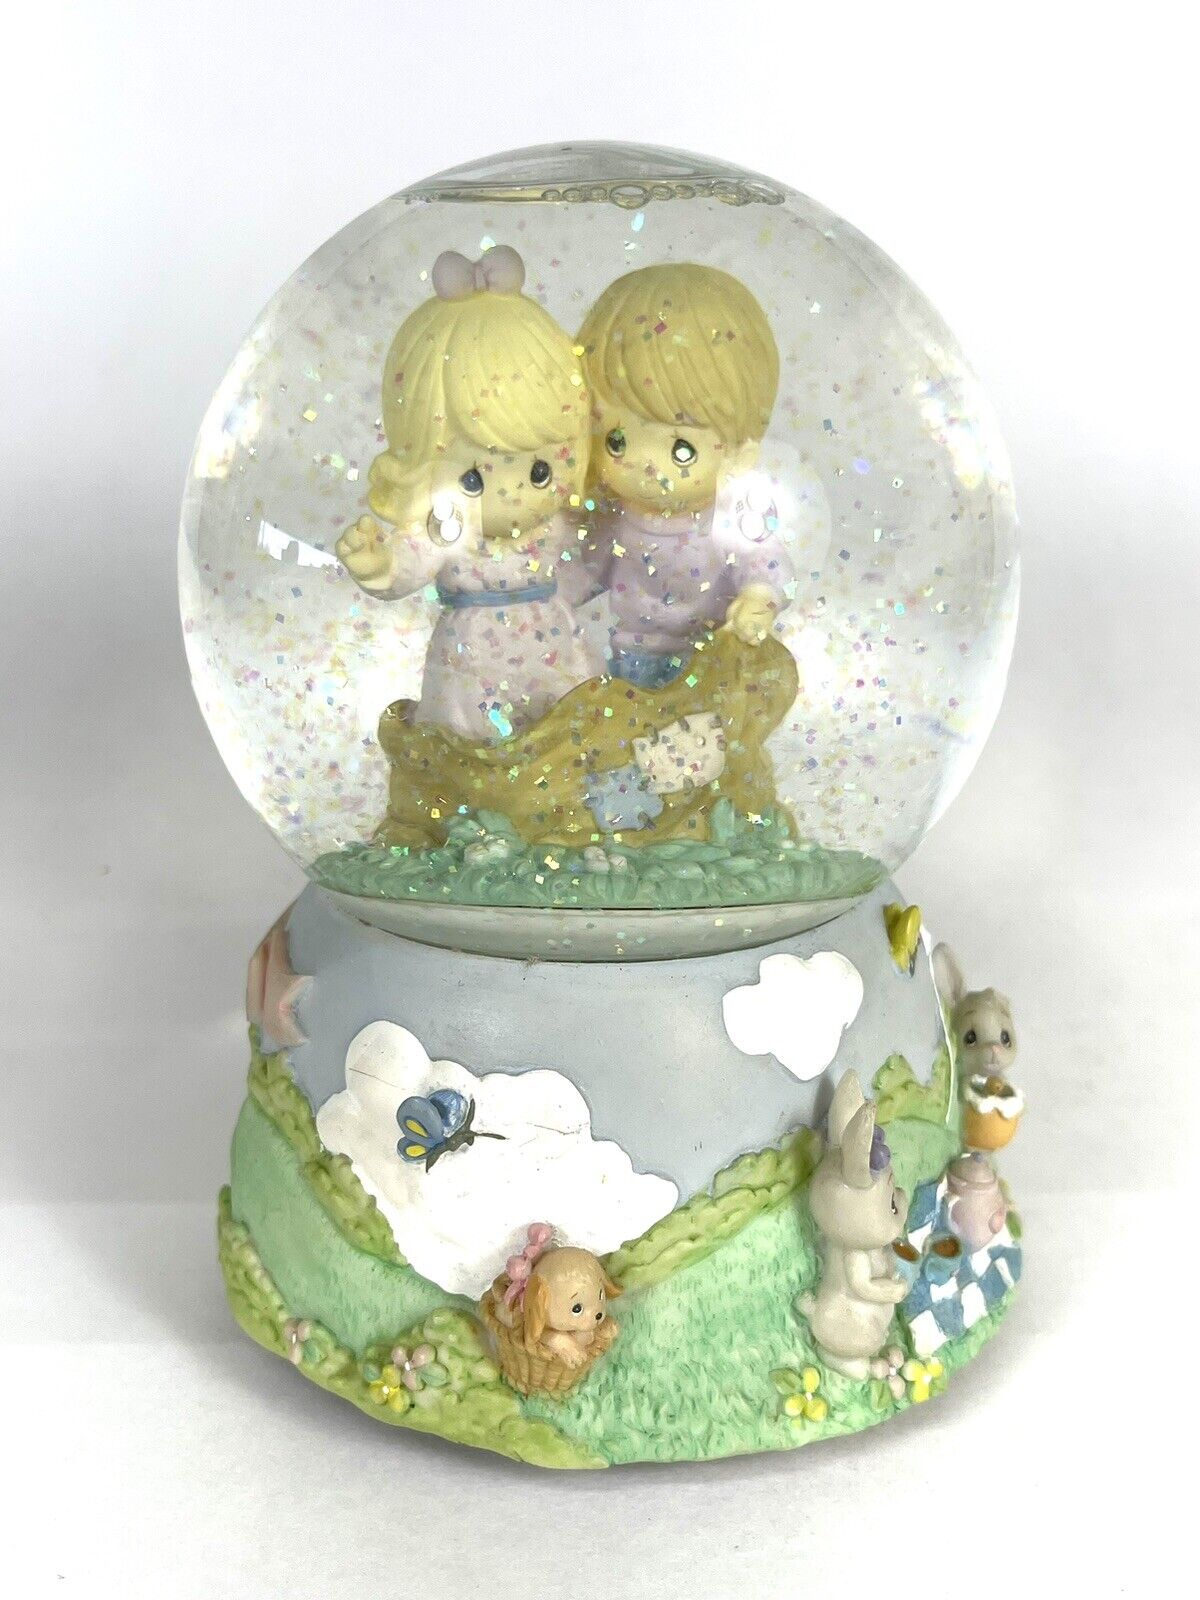 Precious Moments Vintage 2001 Musical Snow Globe “Ring Around The Rosie”